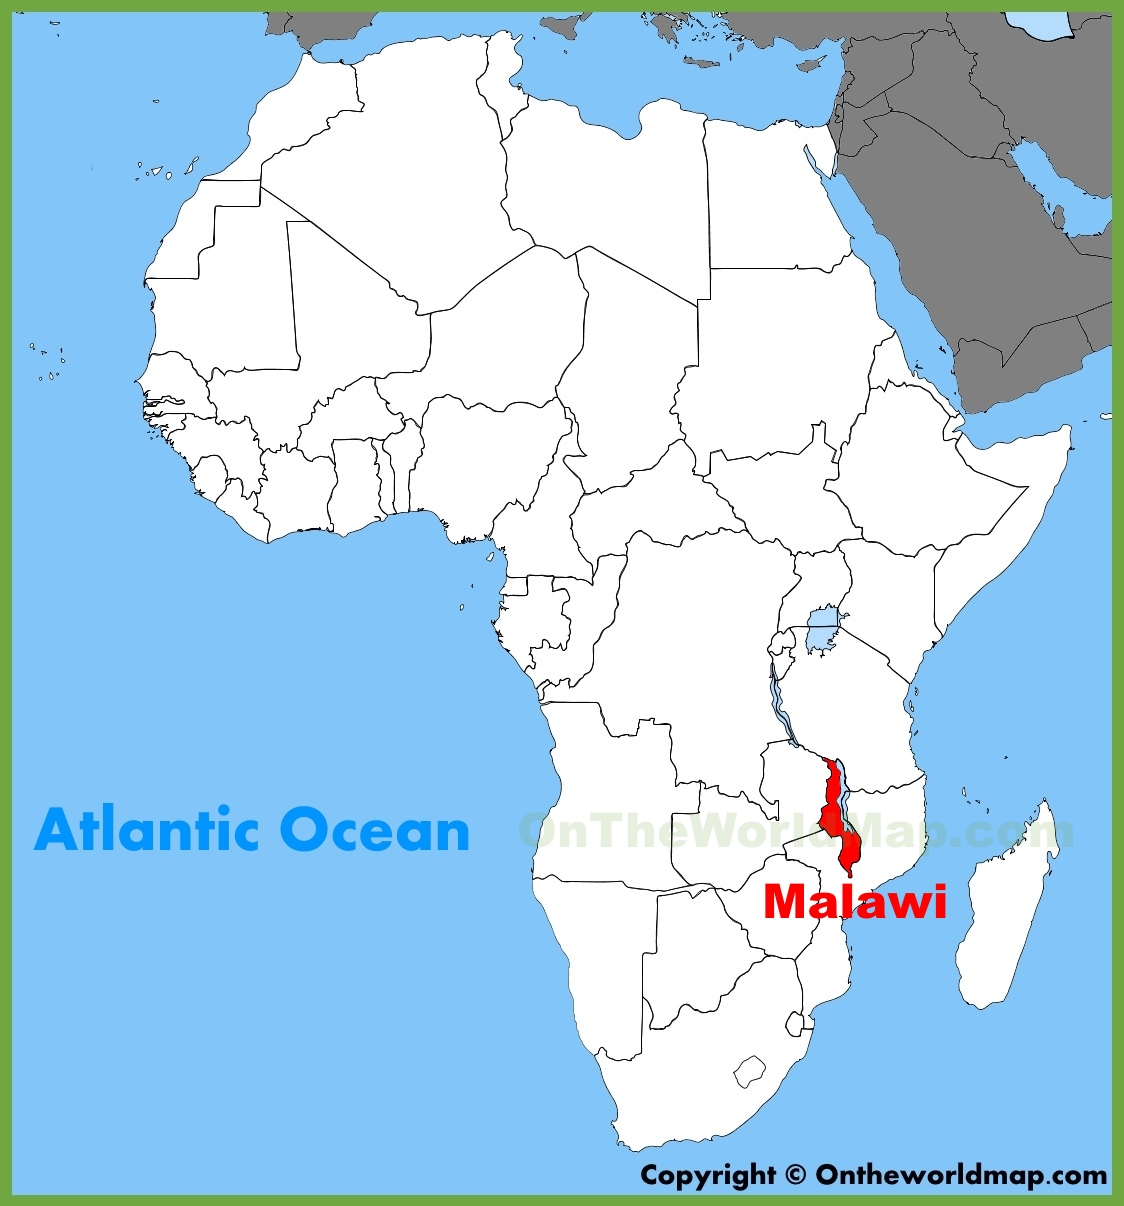 Malawi Location On The Africa Map